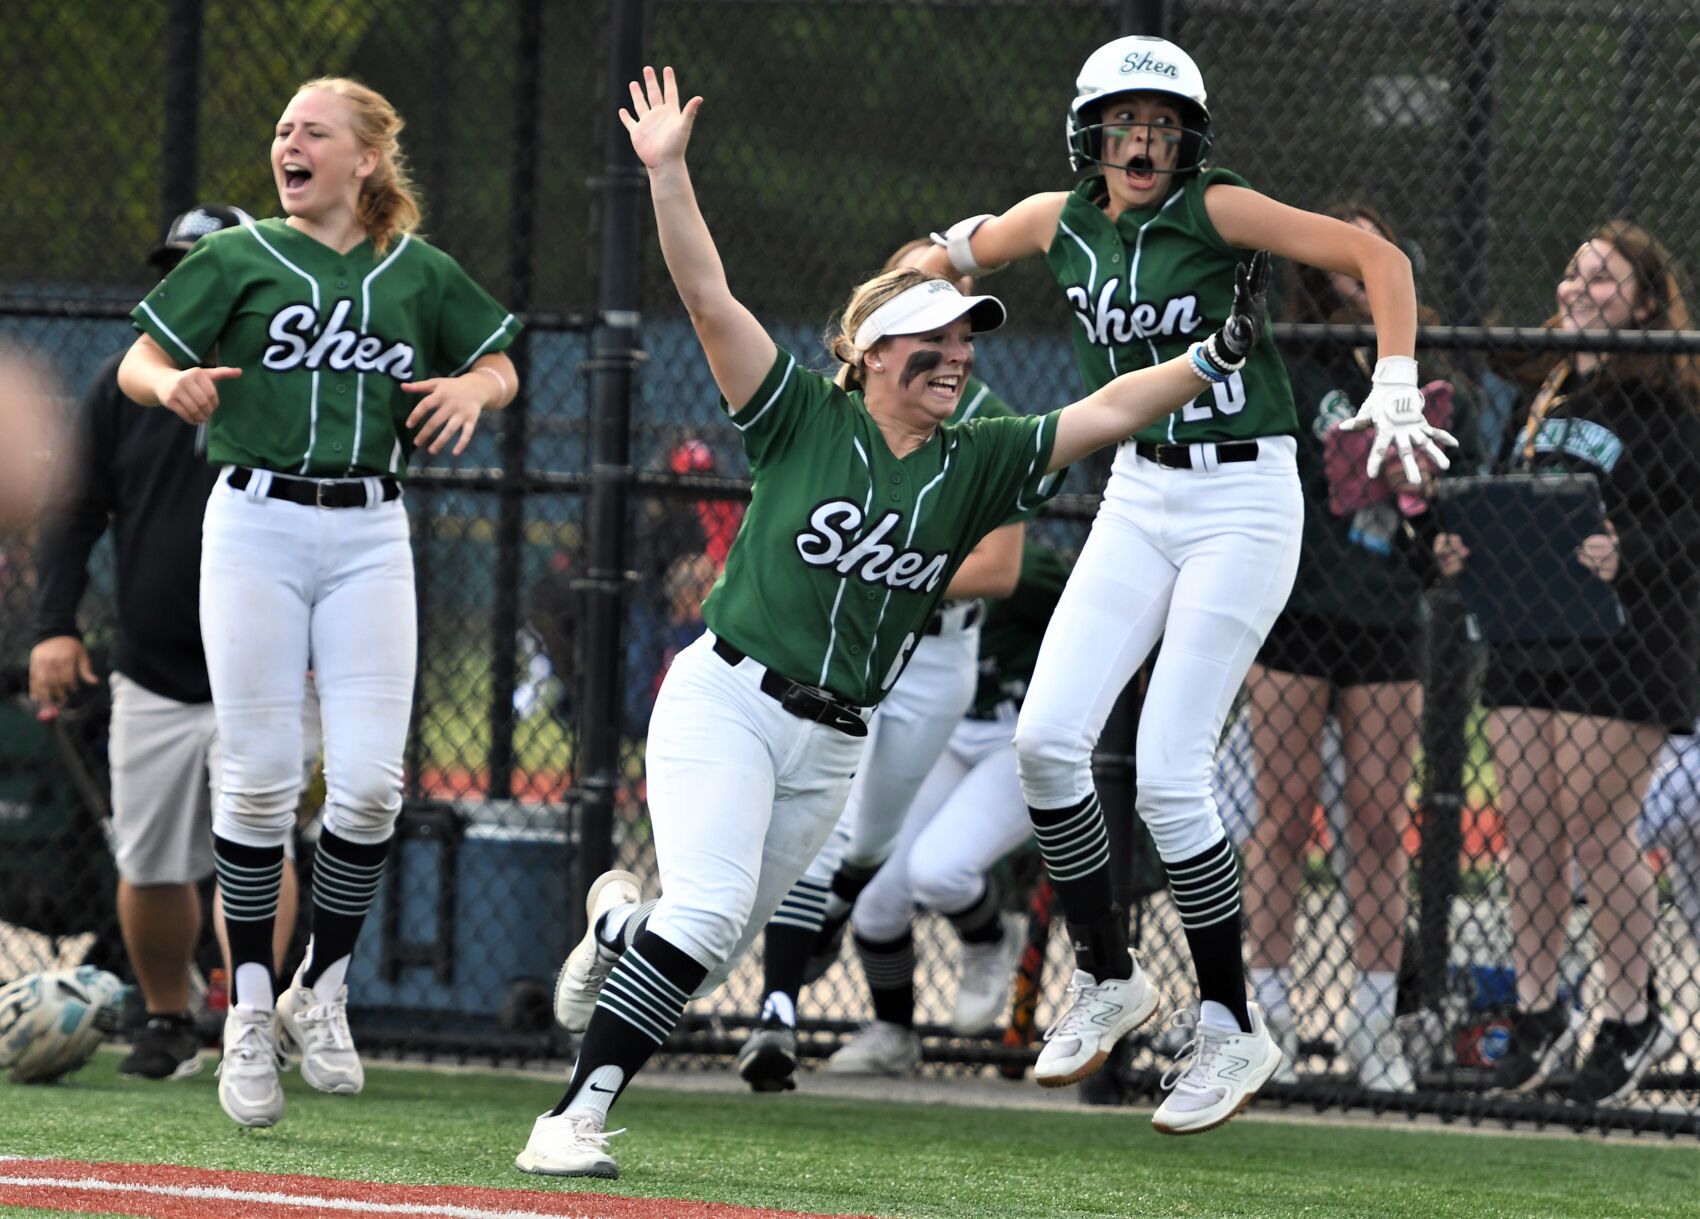 Section 2 Softball: Key Players Return, New Additions, and Class Changes